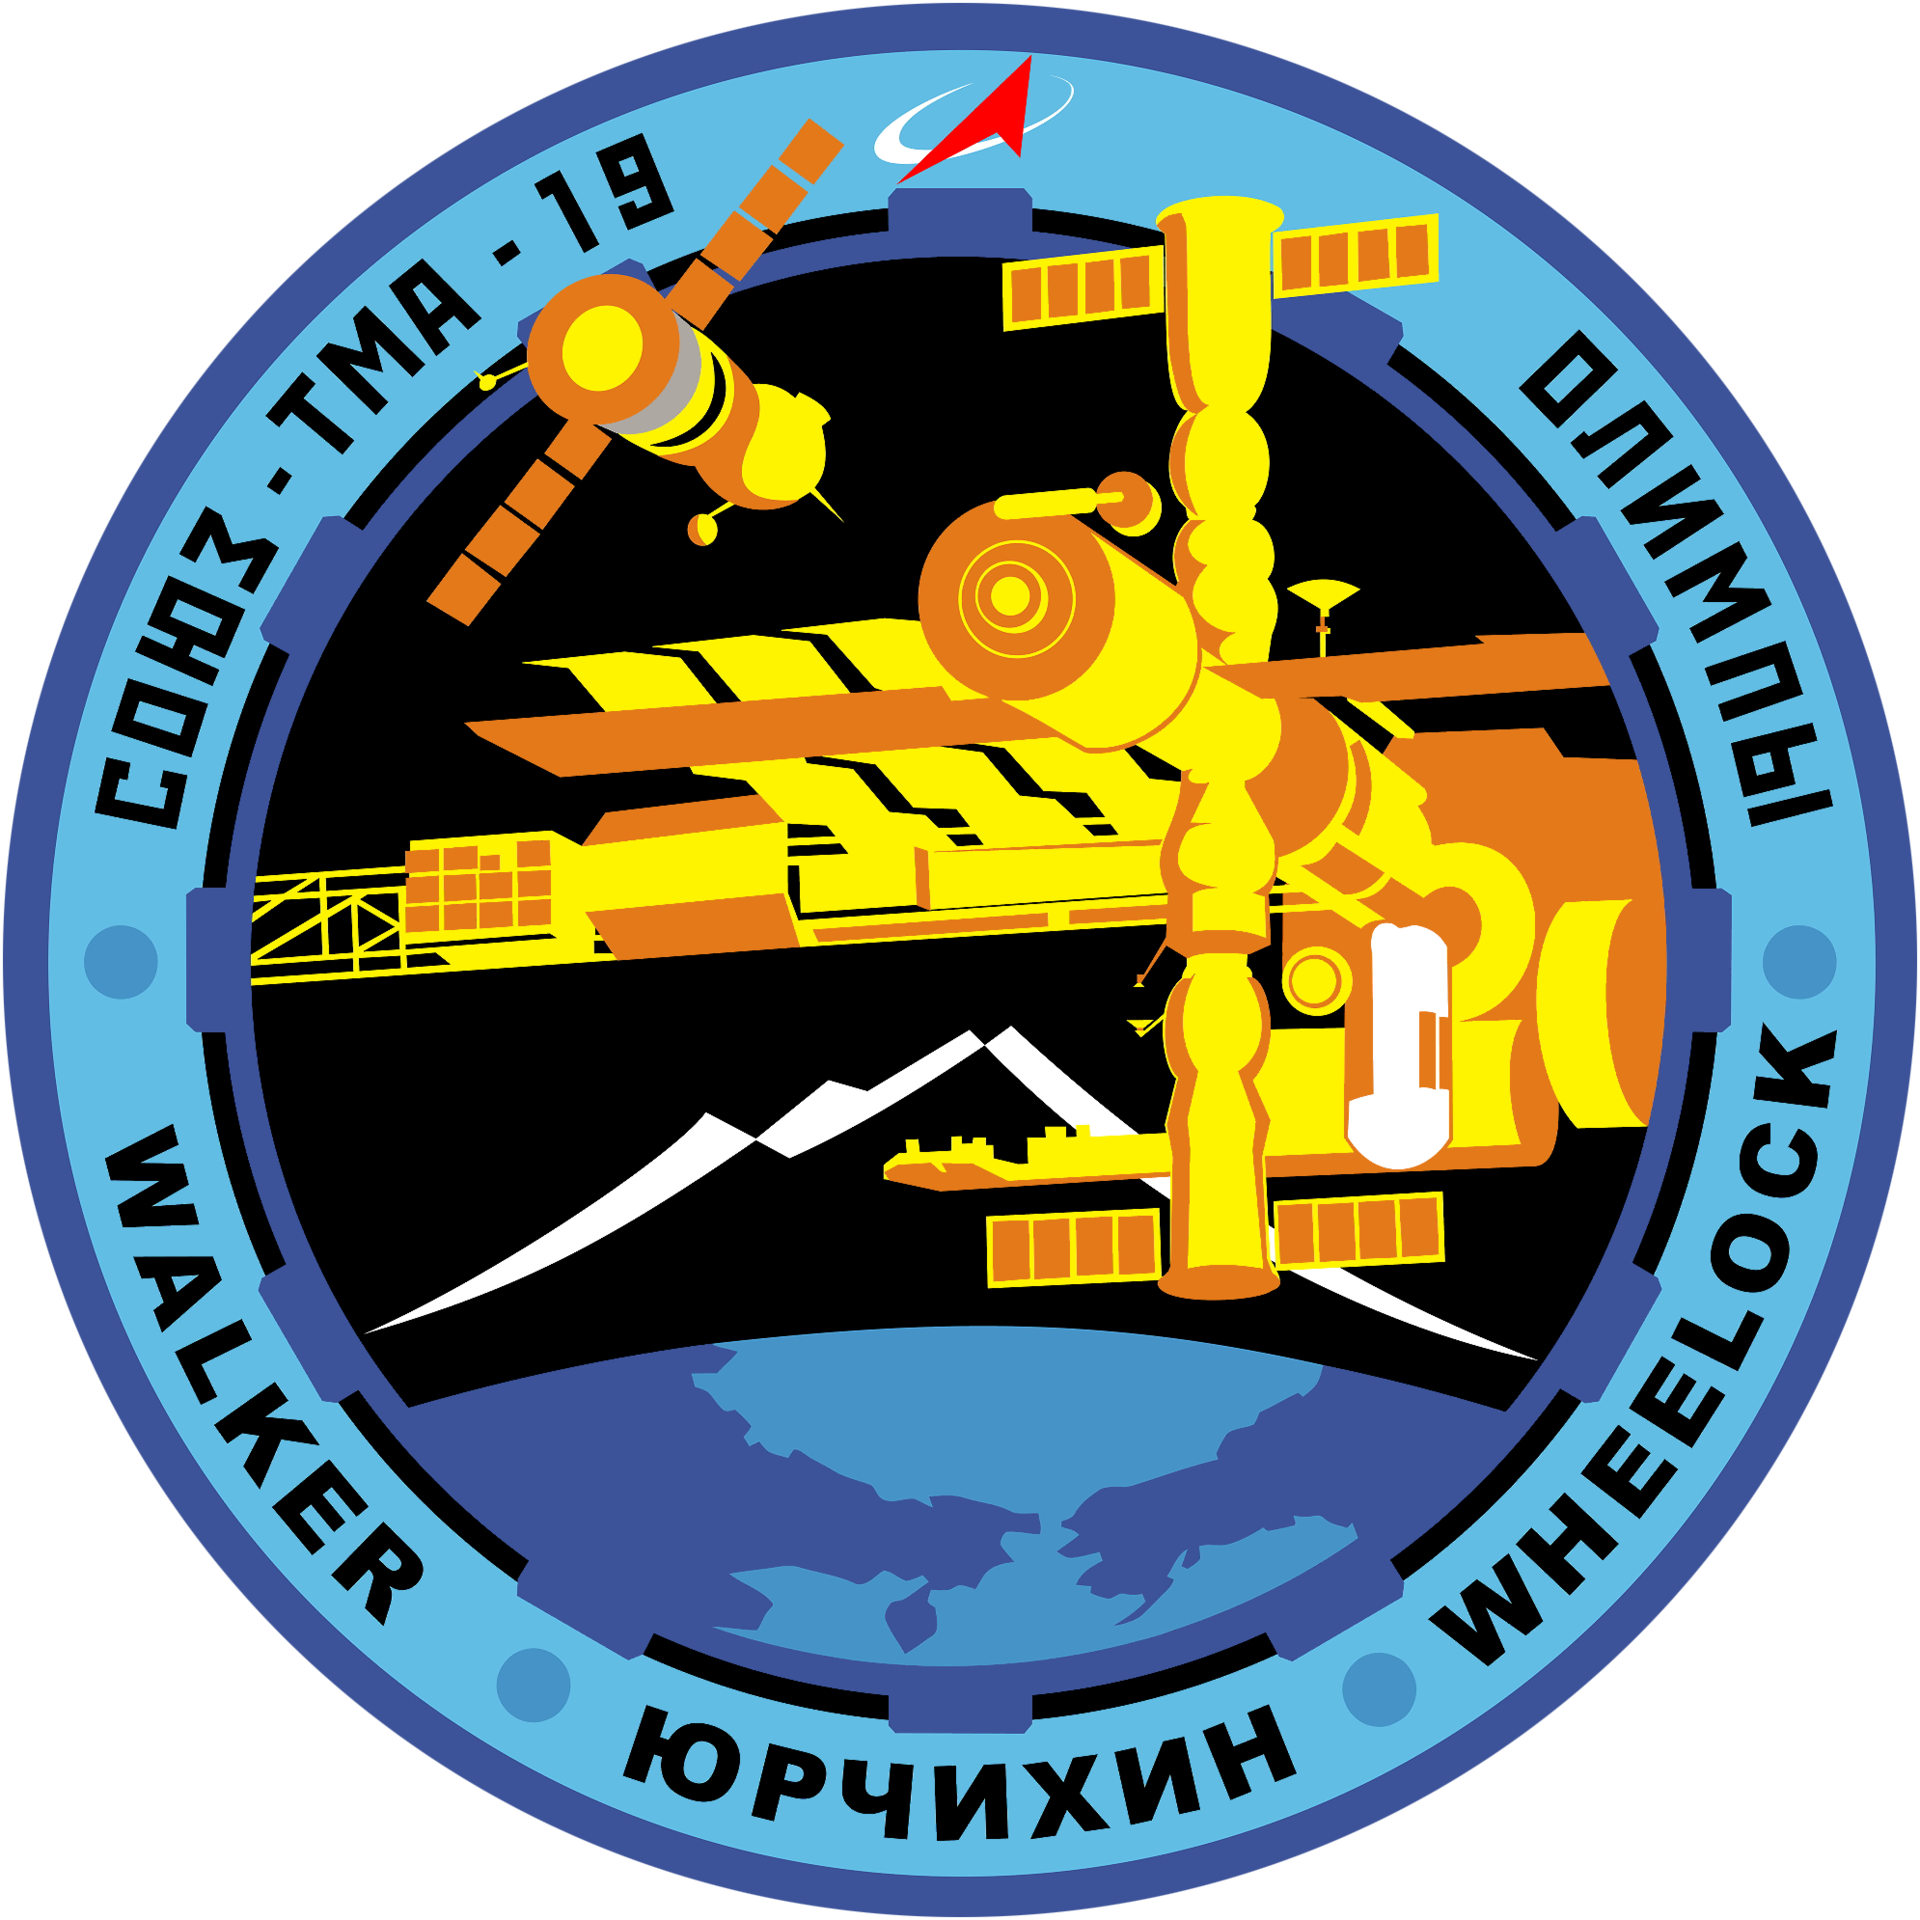 Mission patch for Soyuz TMA-19